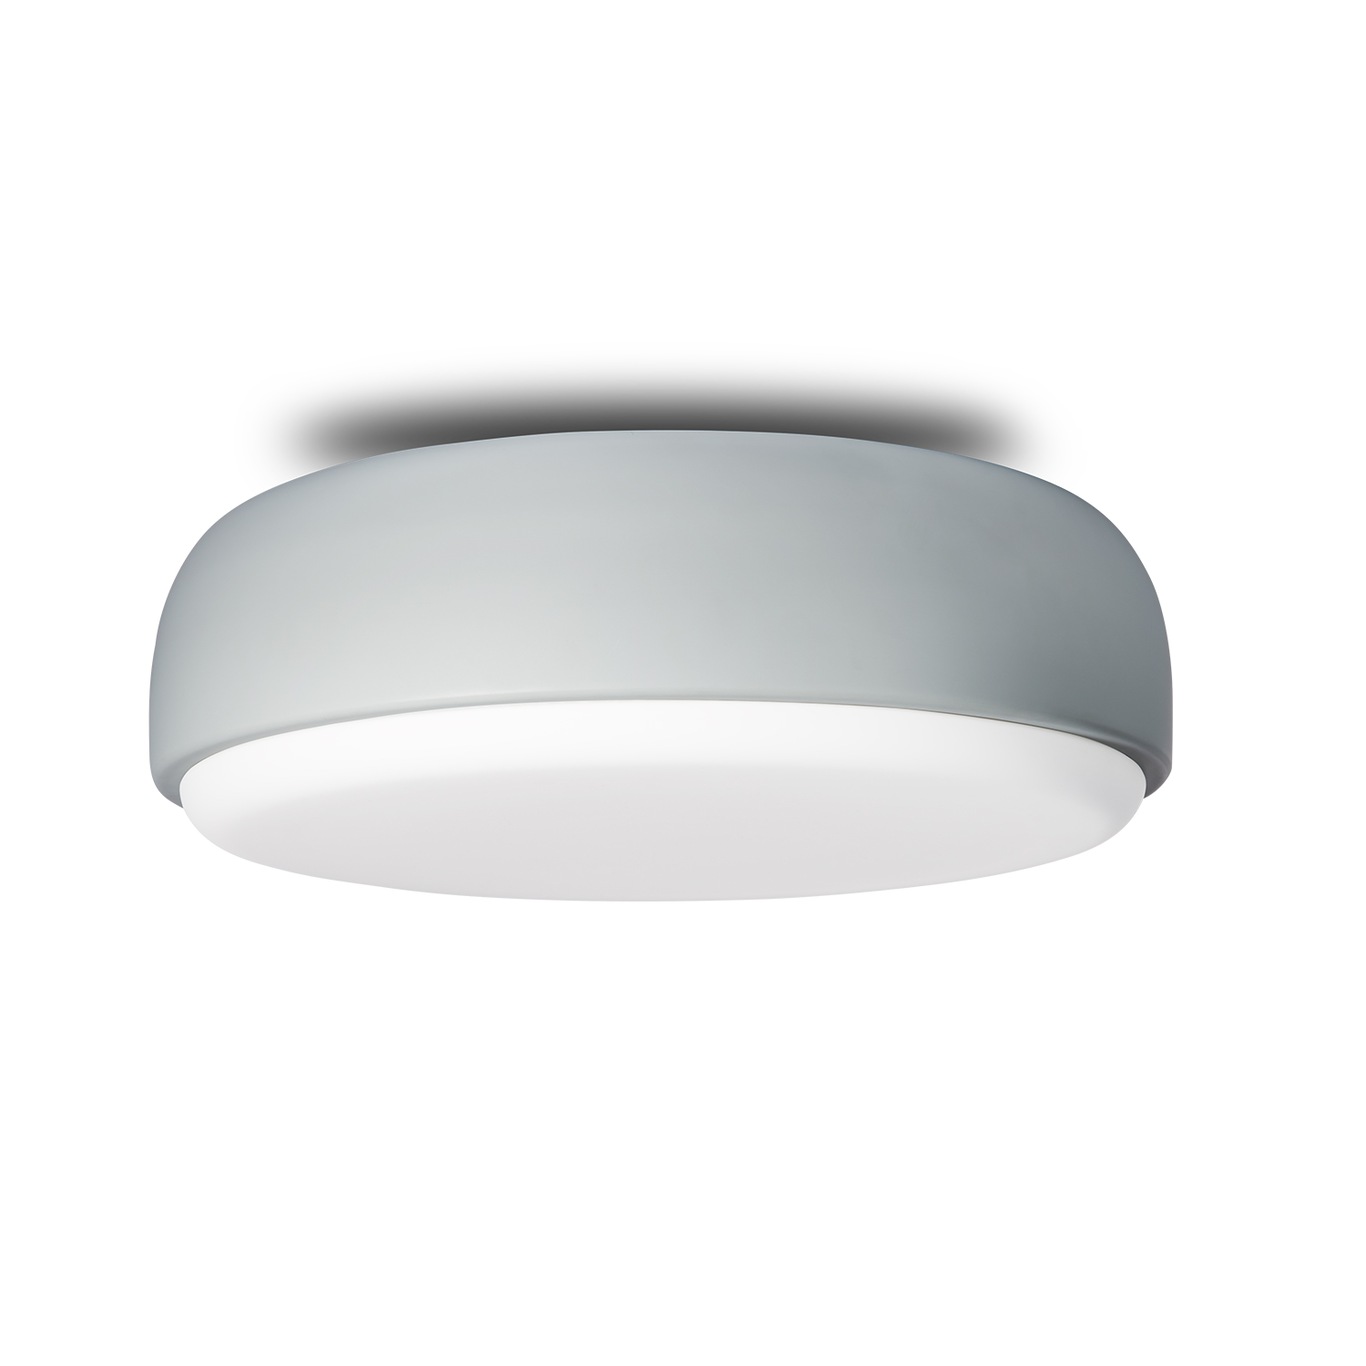 Over Me 40 Ceiling/Wall Lamp, Dusty Blue